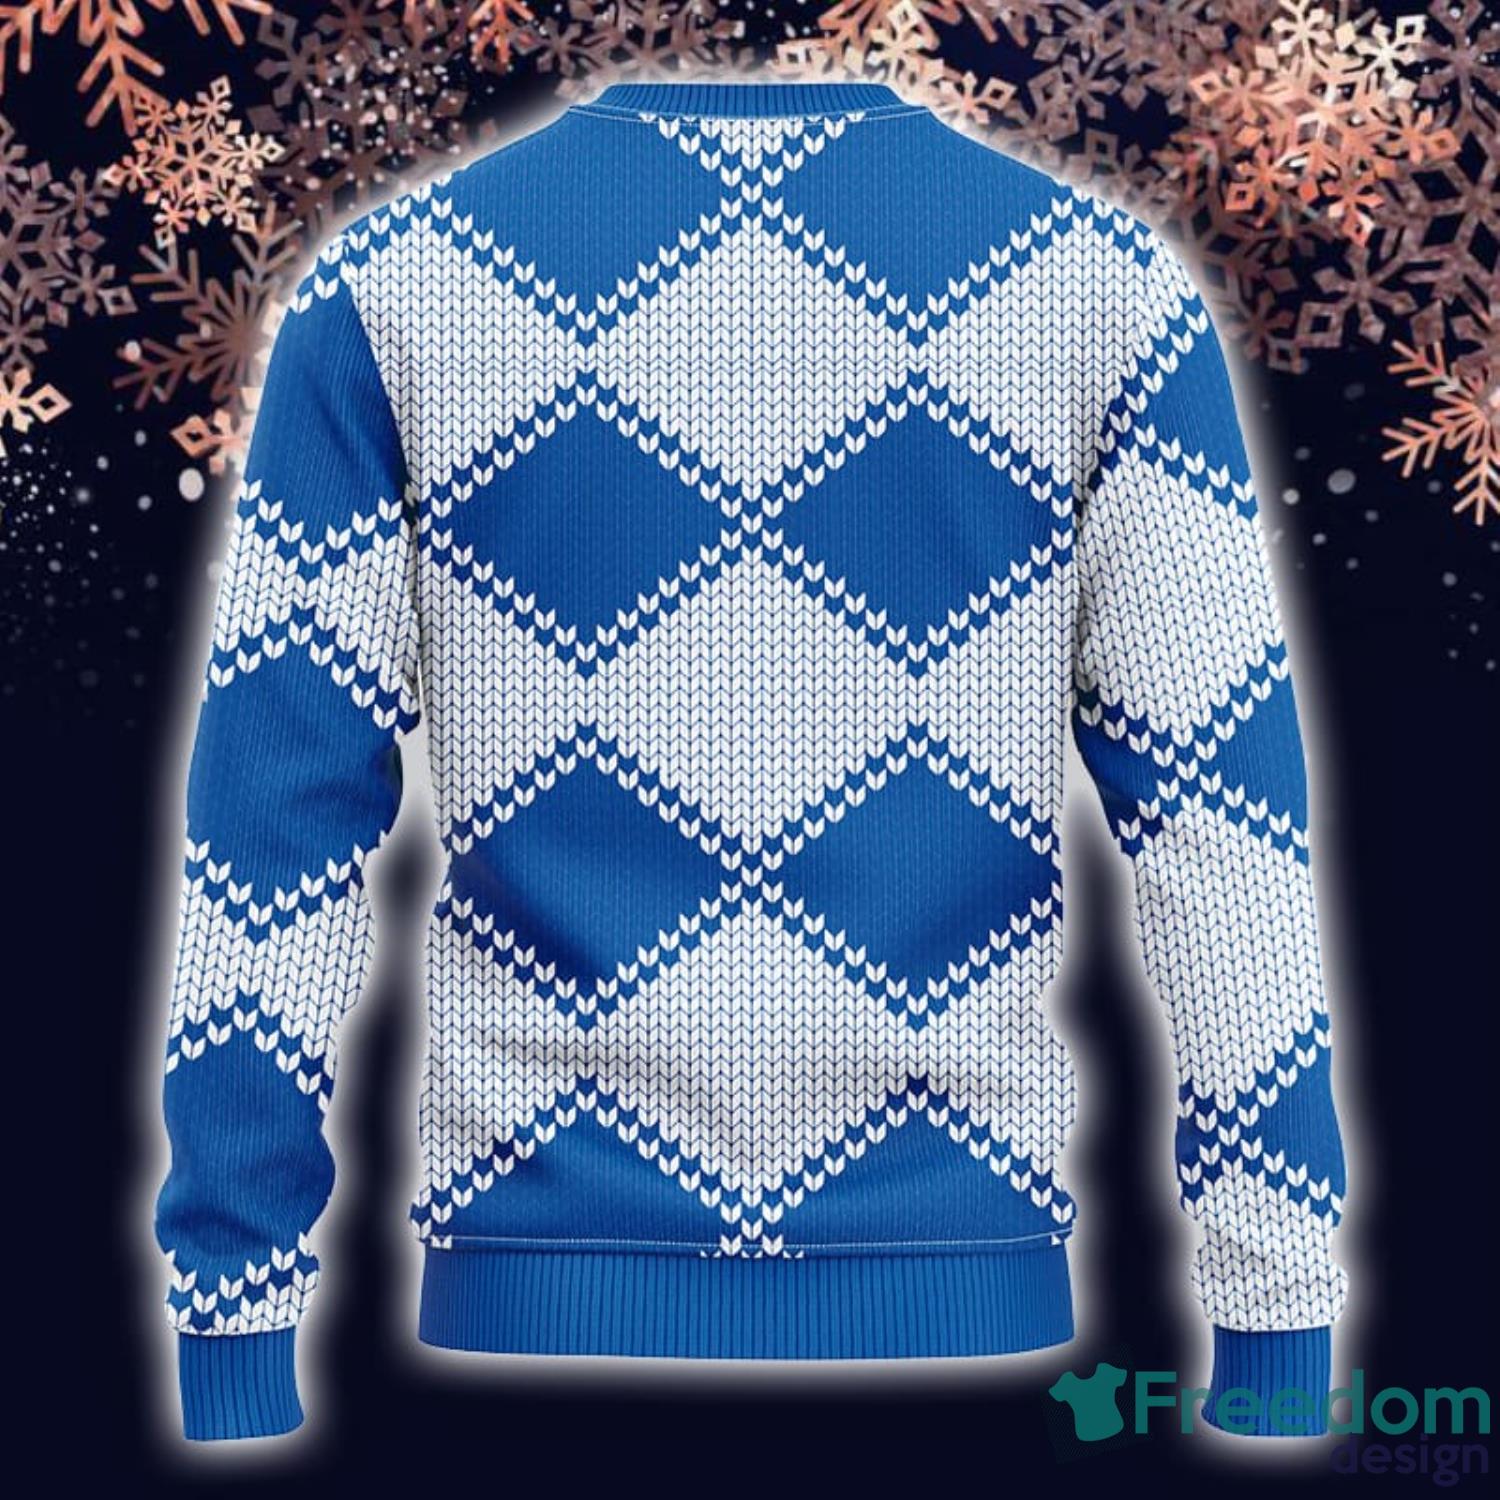 MLB Los Angeles Dodgers Christmas Ugly Sweater For Fans